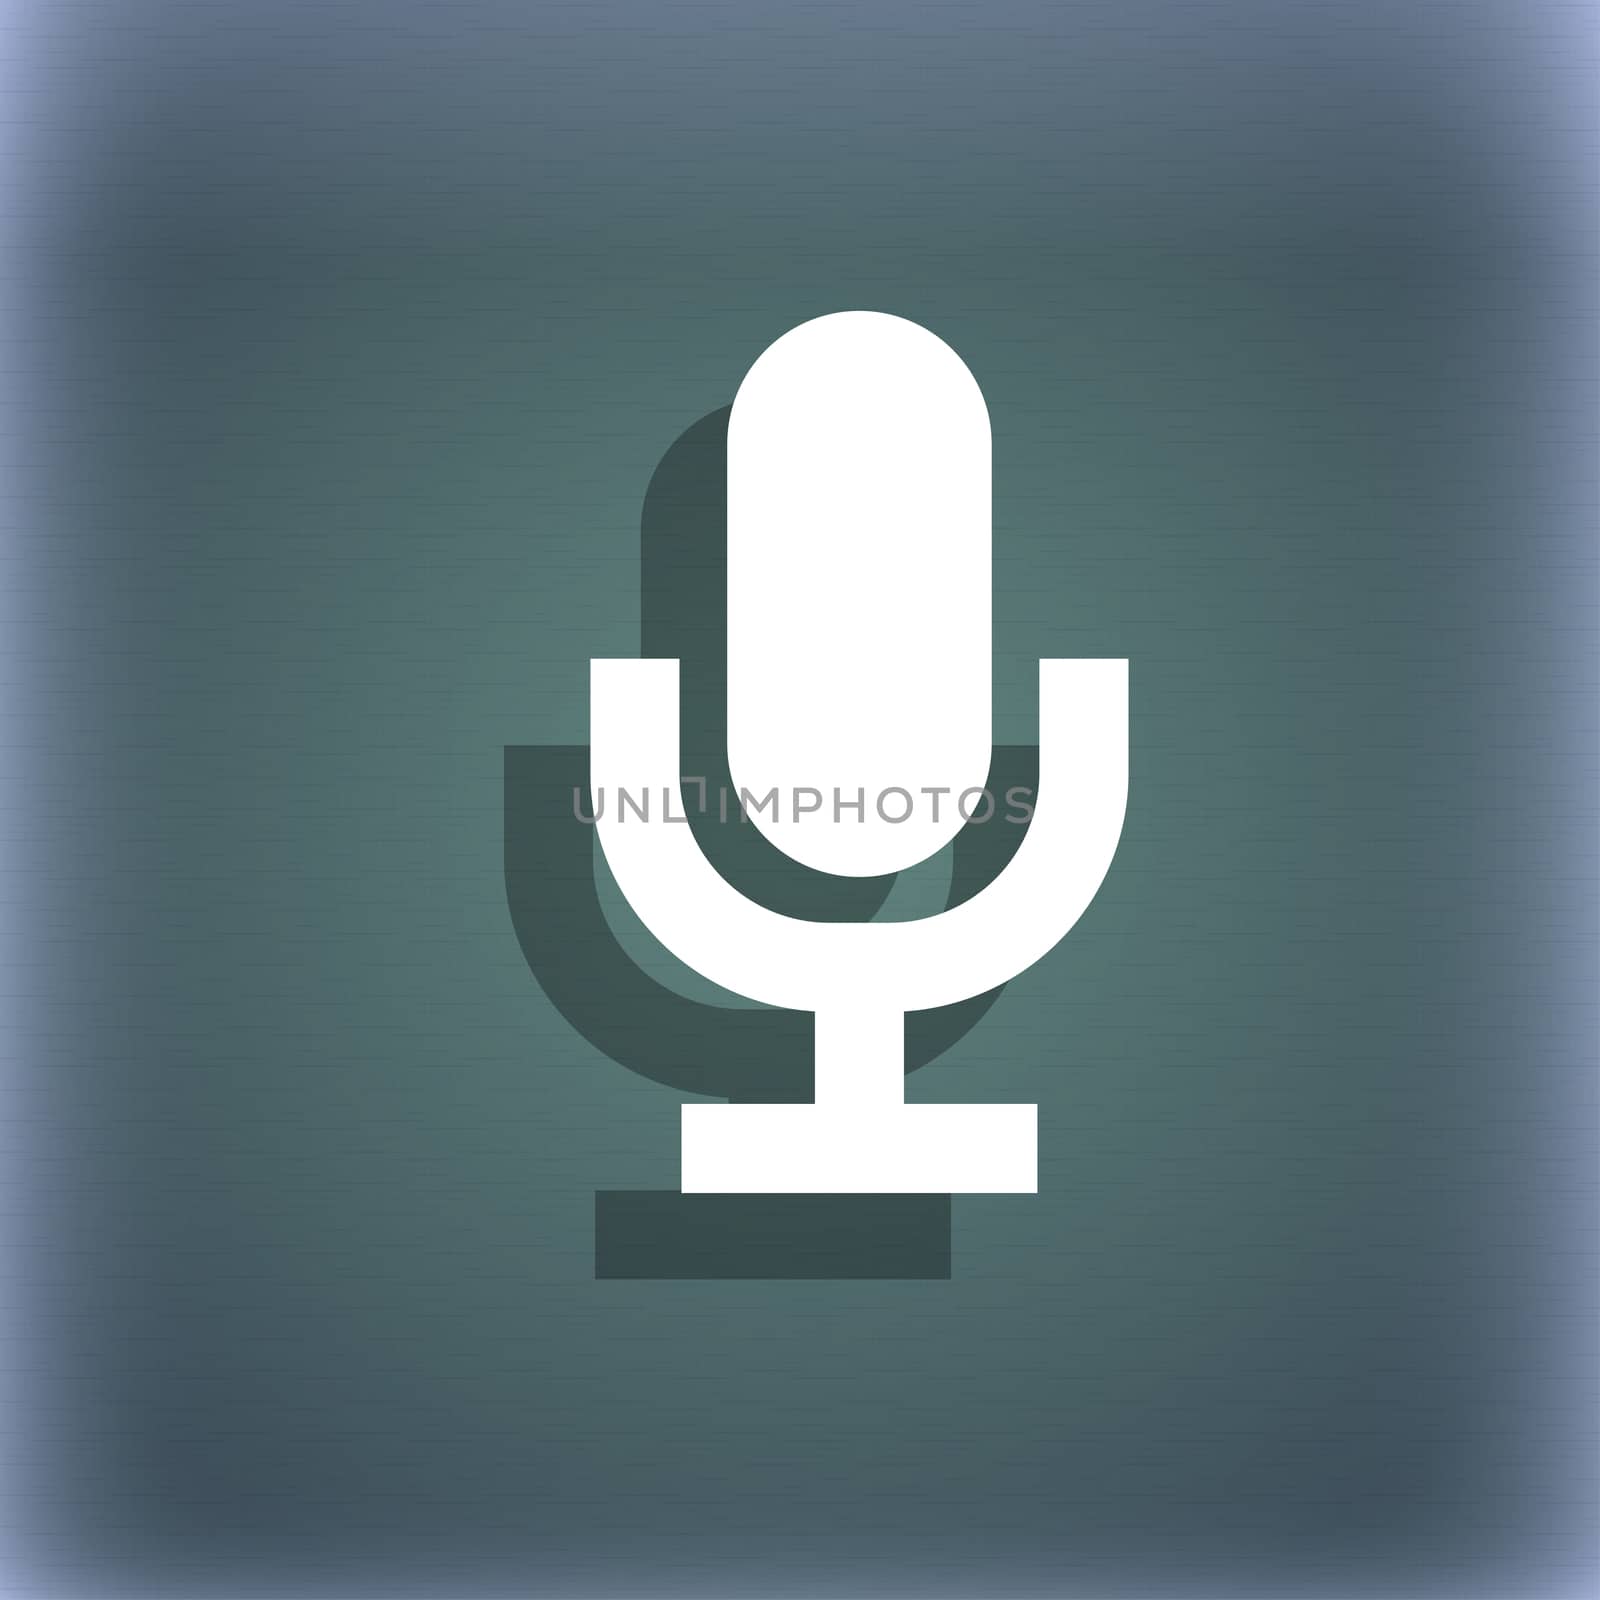 microphone icon symbol on the blue-green abstract background with shadow and space for your text. illustration